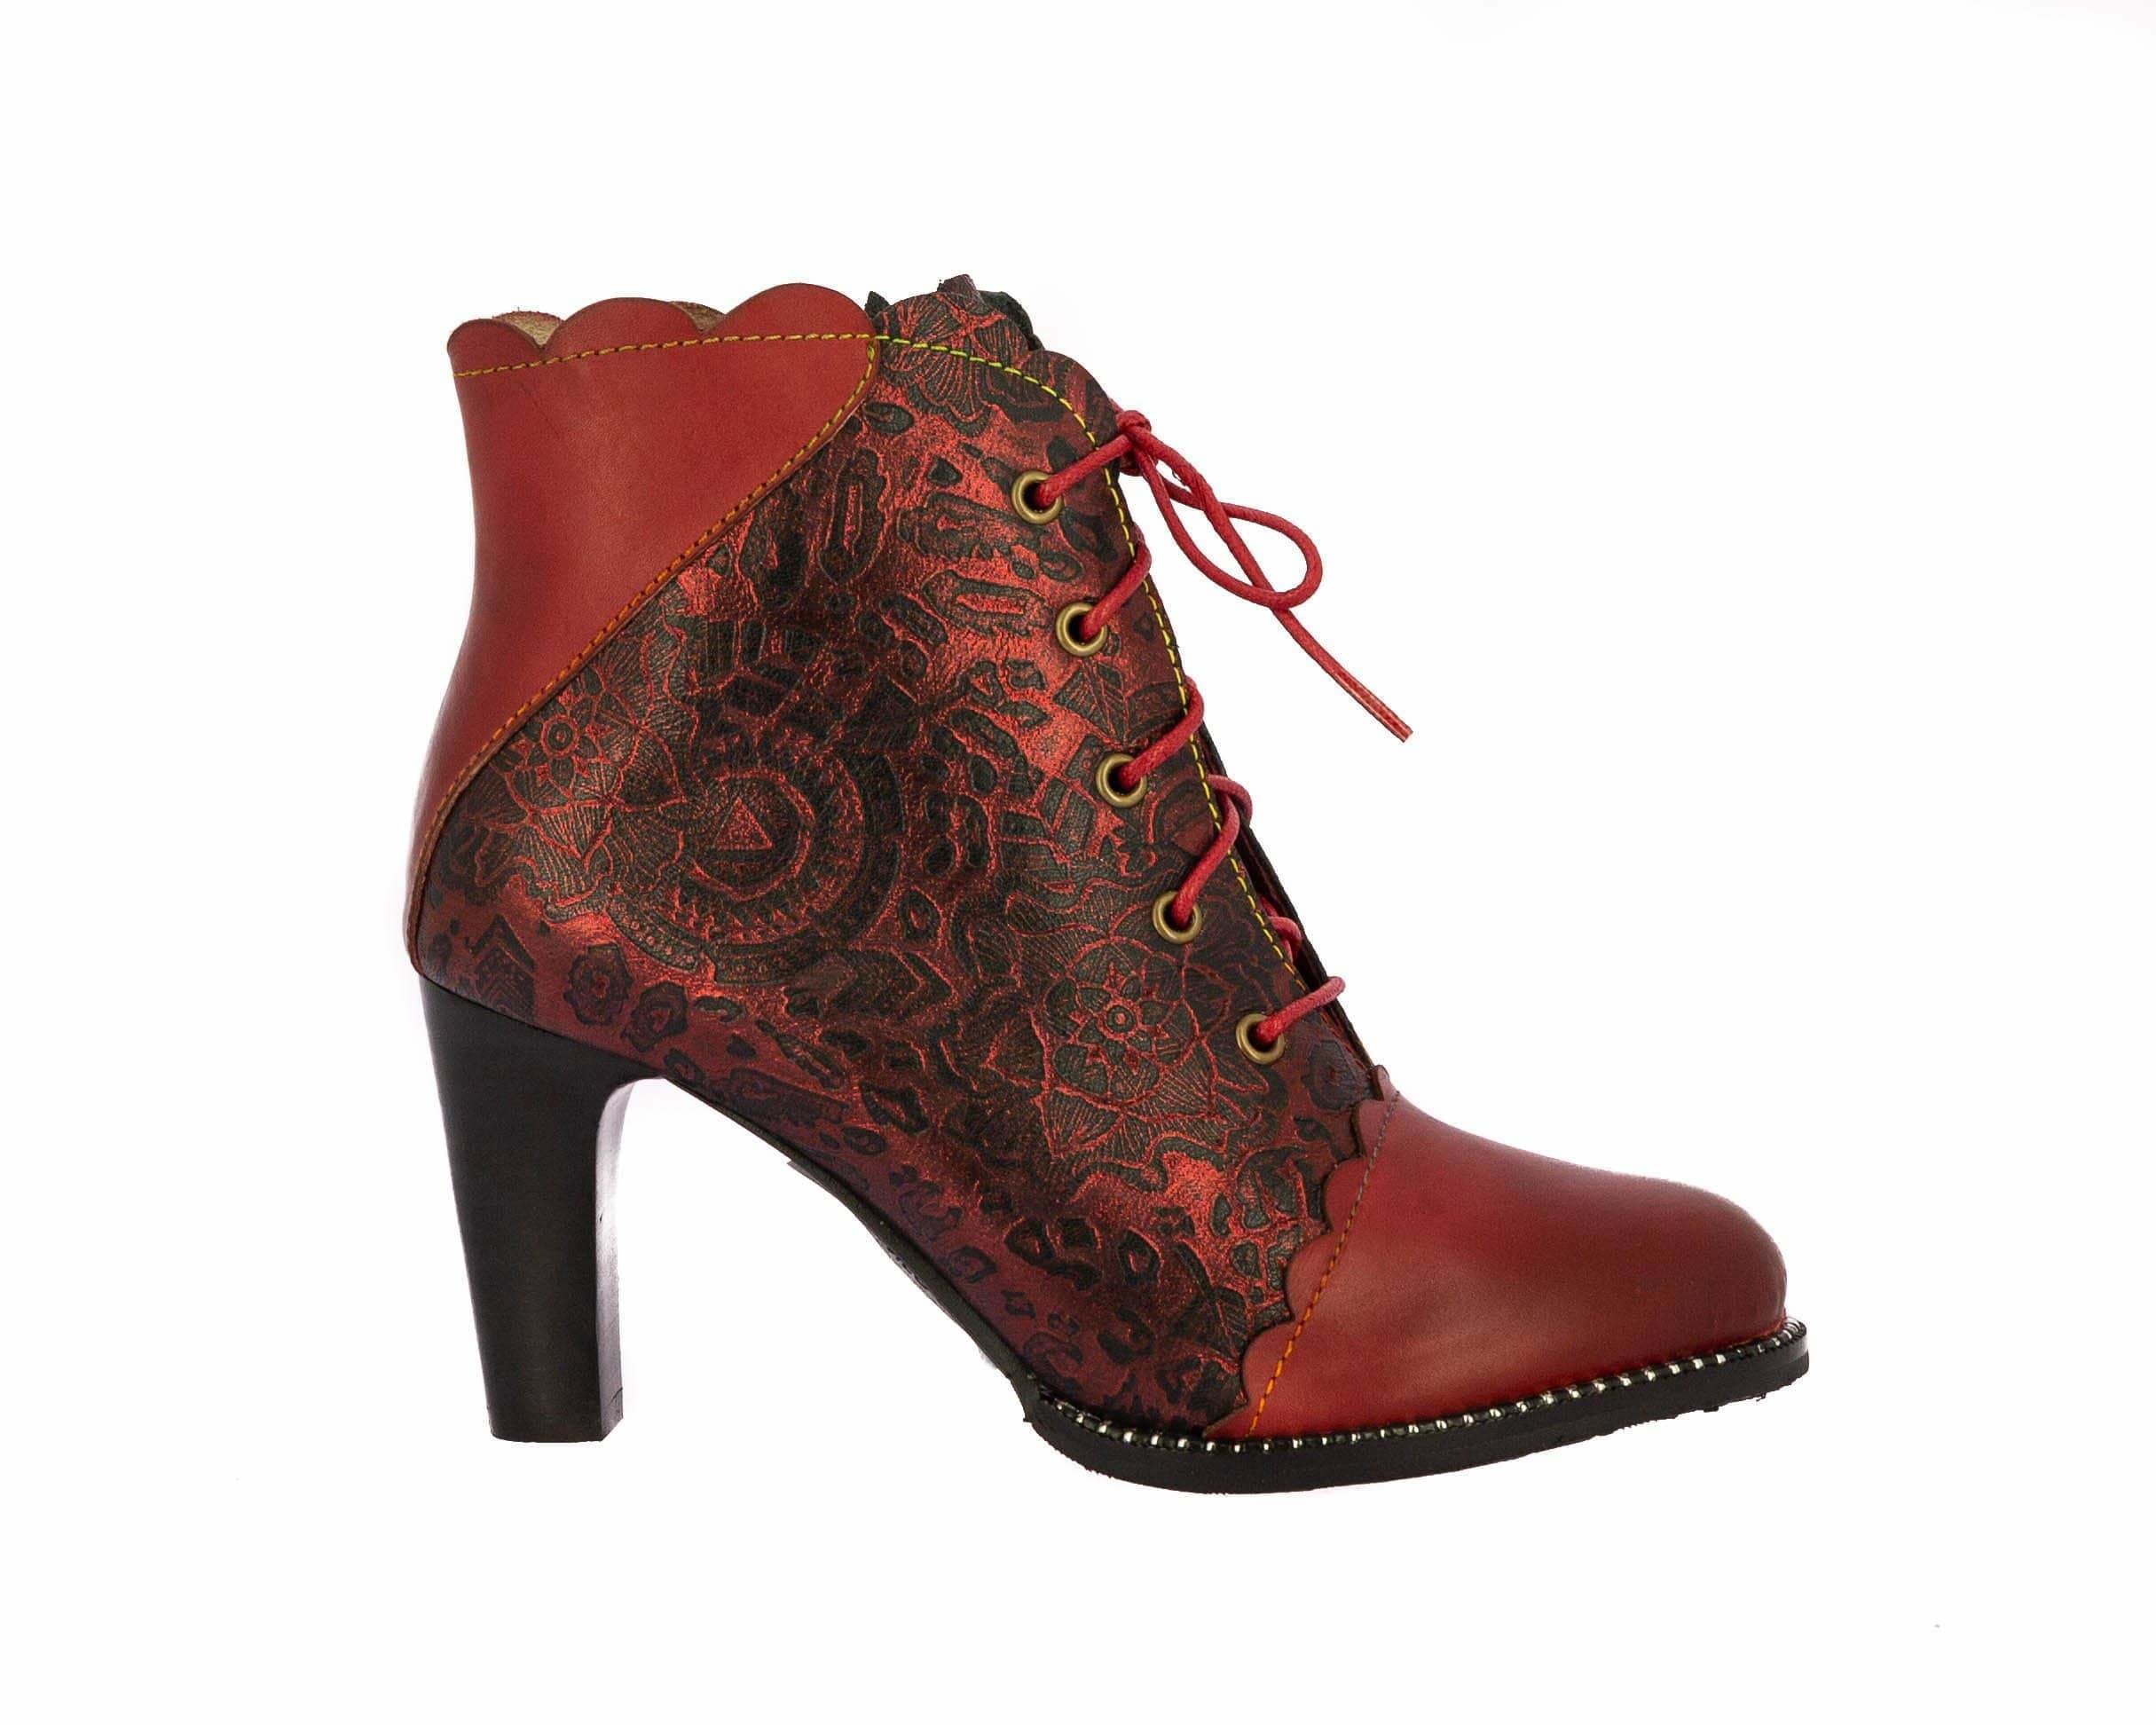 Shoe ALCBANEO127 - 35 / RED - Boot